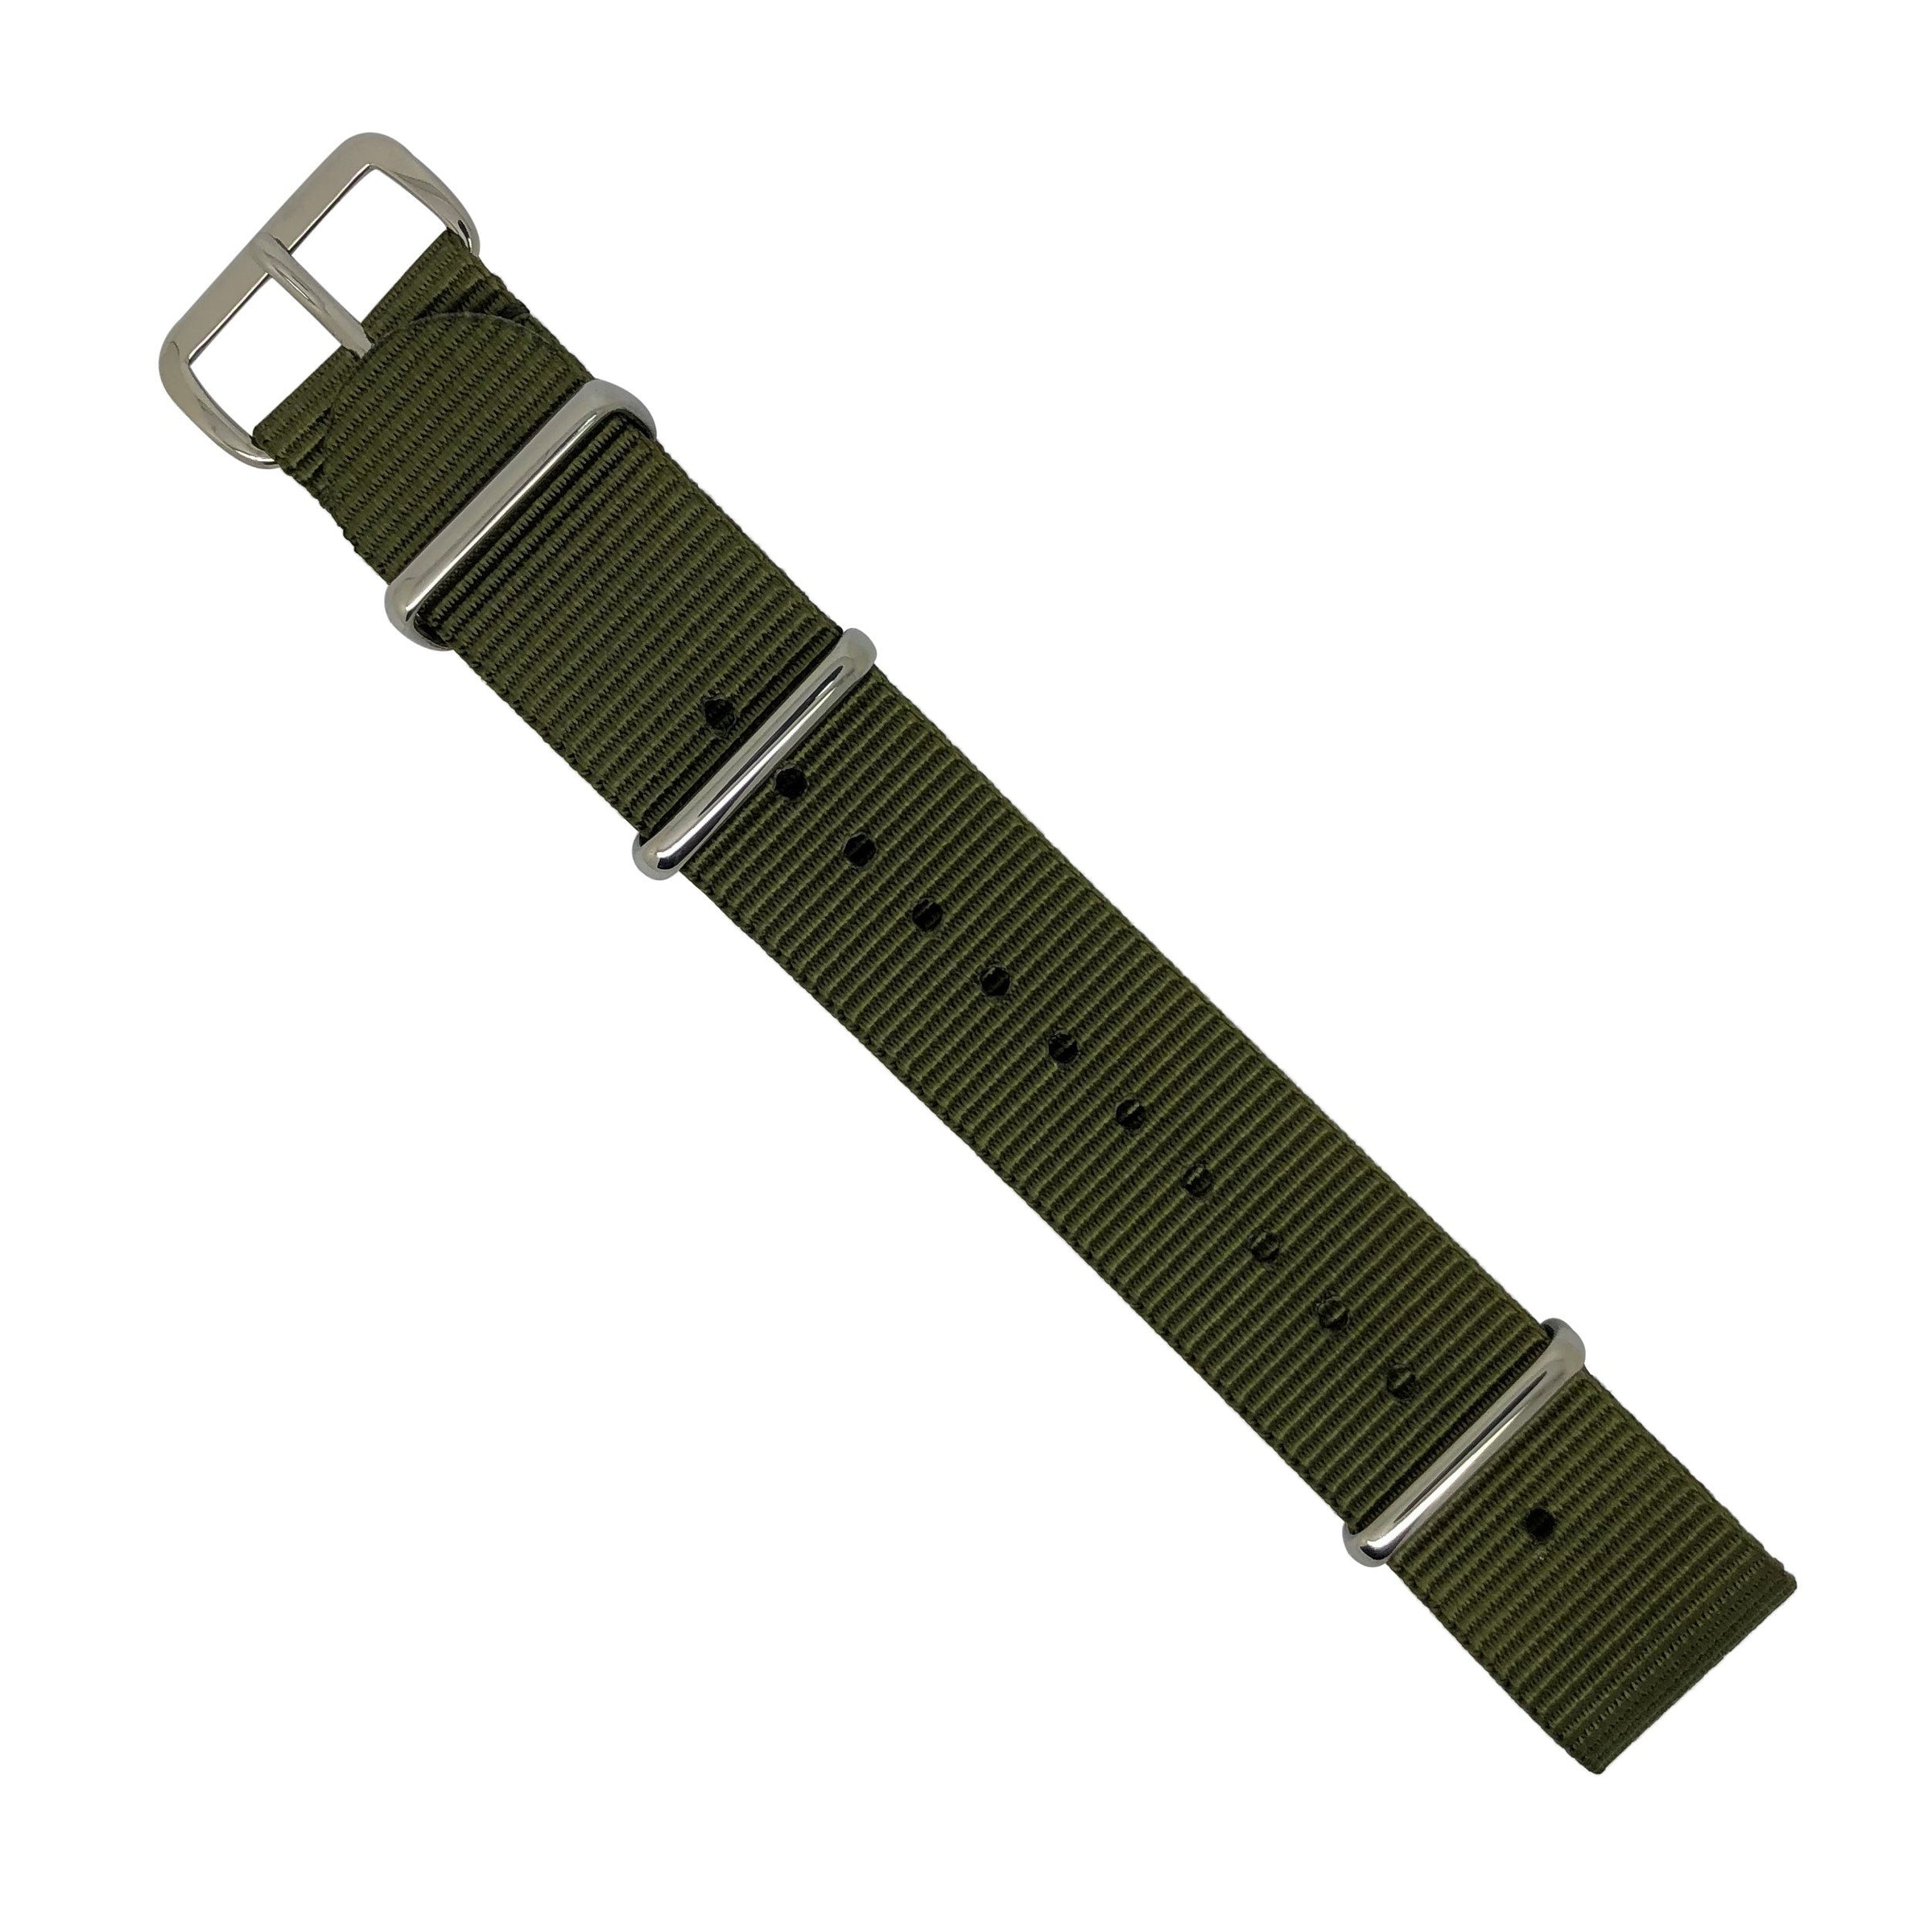 Premium Nato Strap in Olive with Polished Silver Buckle (18mm) - Nomadstore Singapore